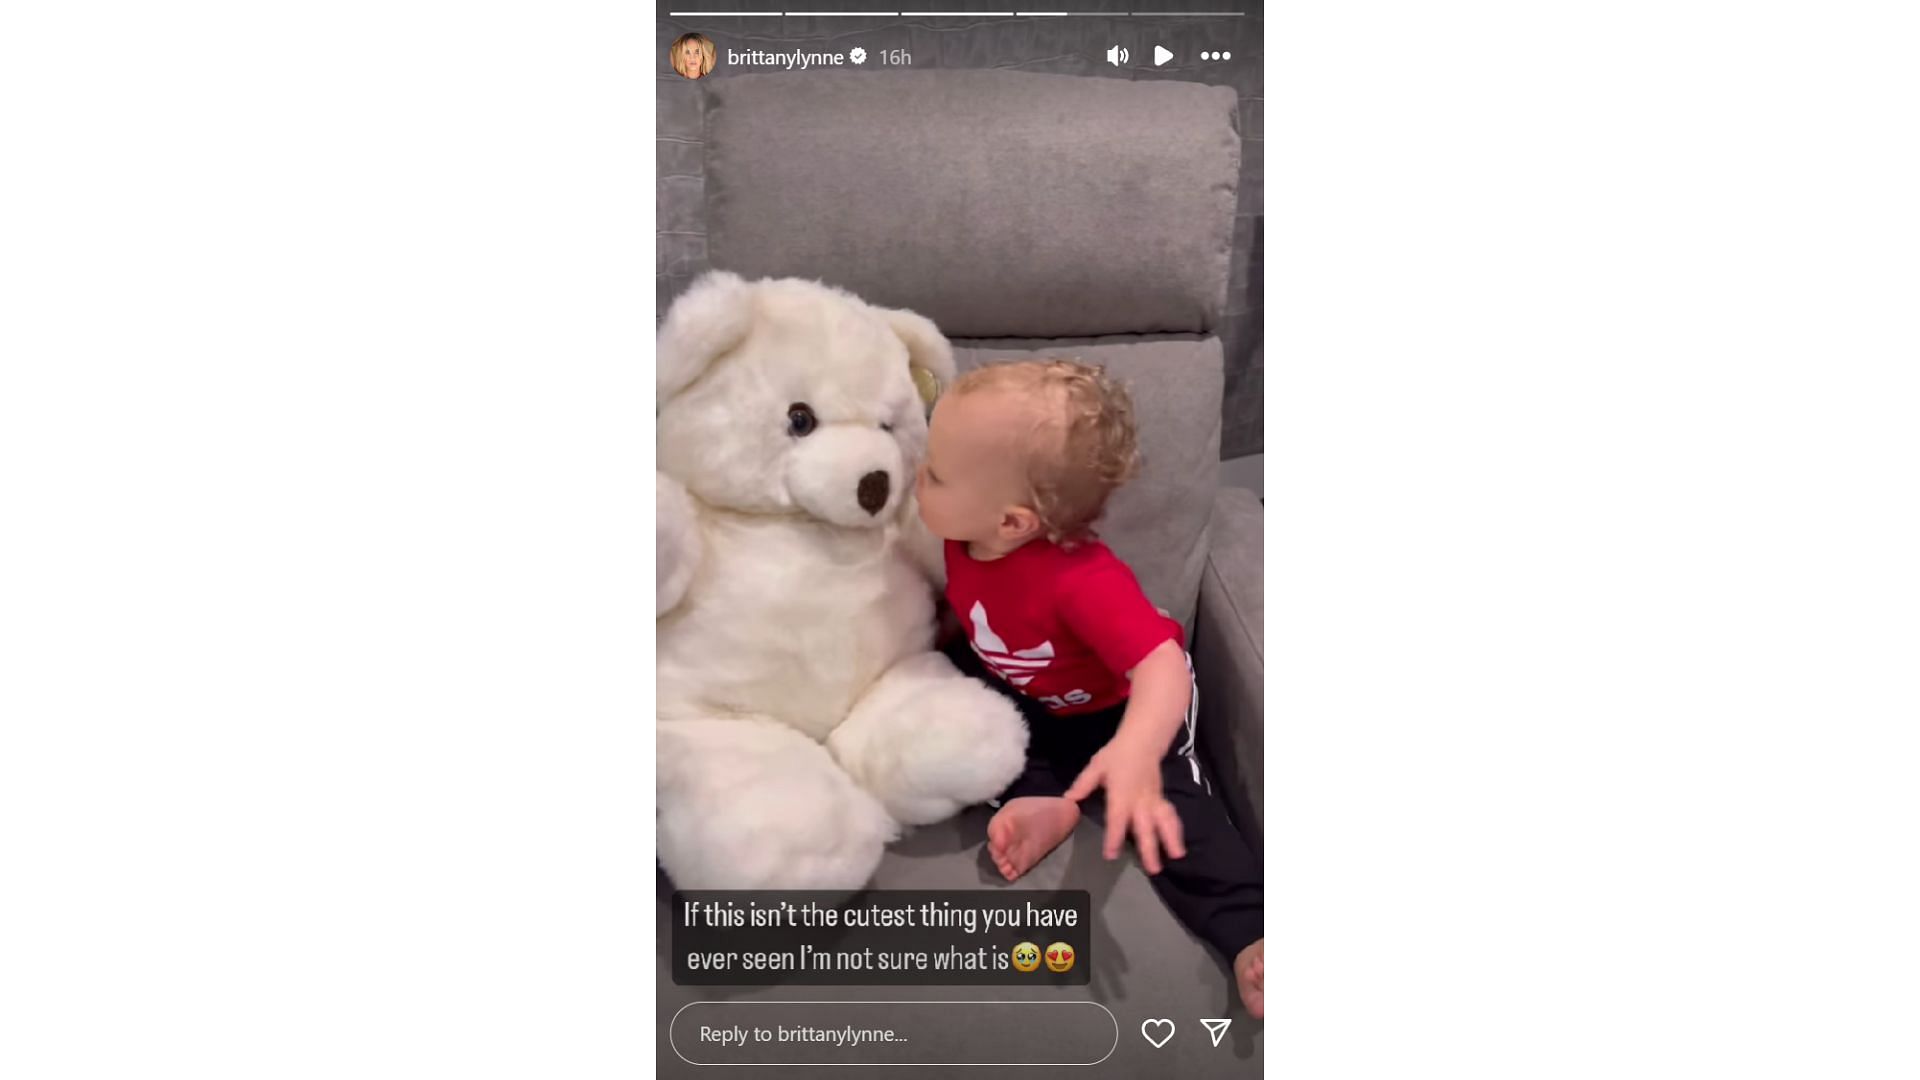 Patrick Mahomes&#039; son playing with his teddy bear (Image credit: @brittanylynne)